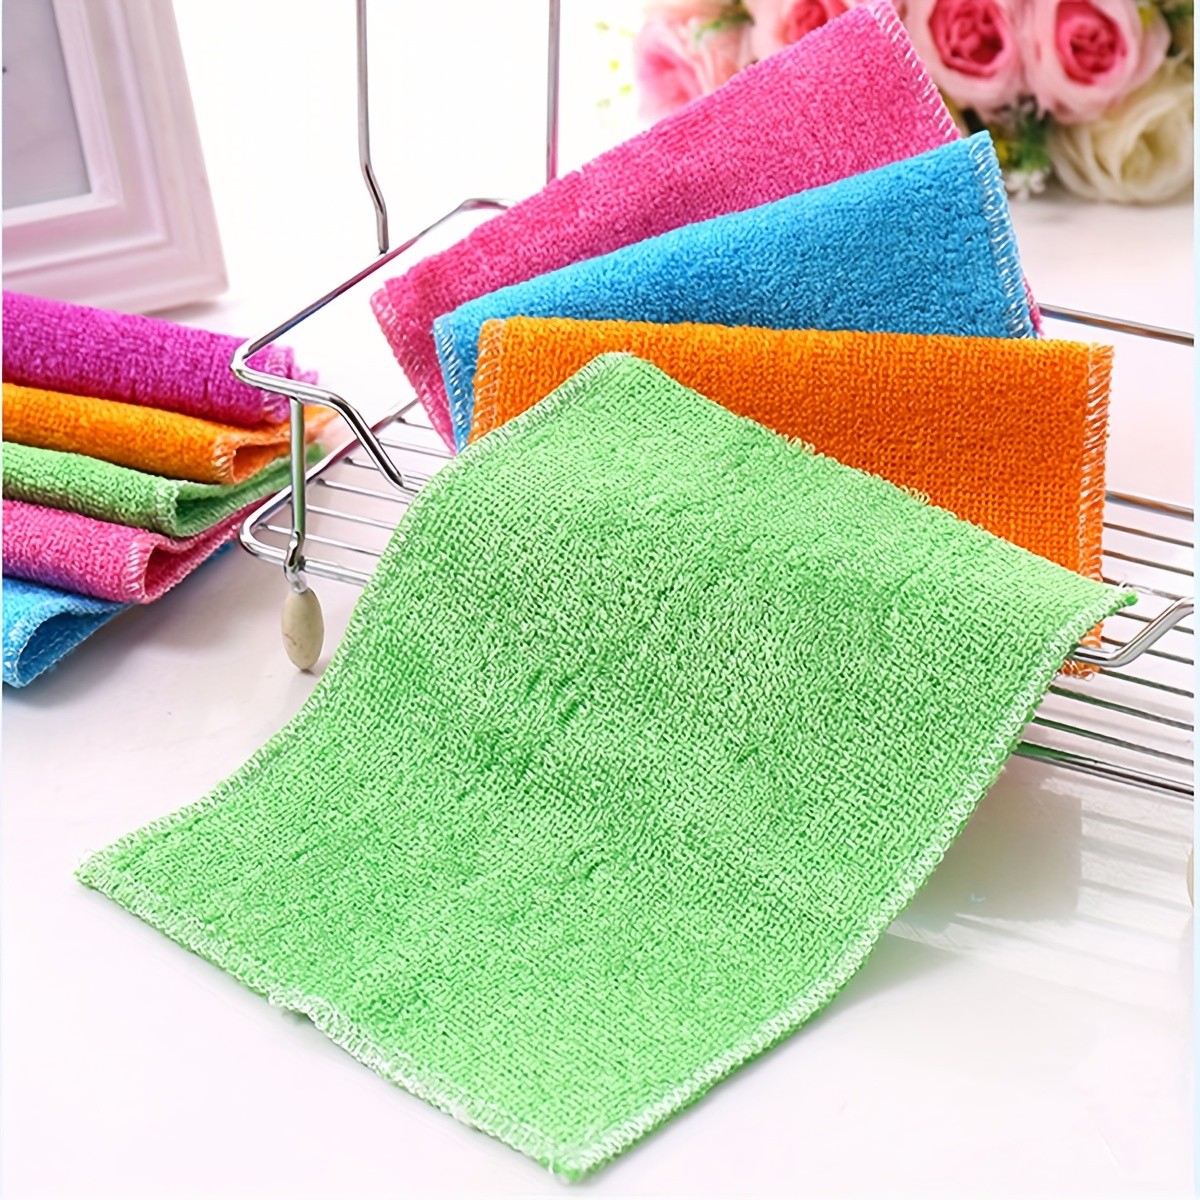 Kitchen Wipping Rags Anti-Grease Tableware Cleaning Cloth Microfiber  Absorbent Washing Dish Towel Home Tools Scouring Pad